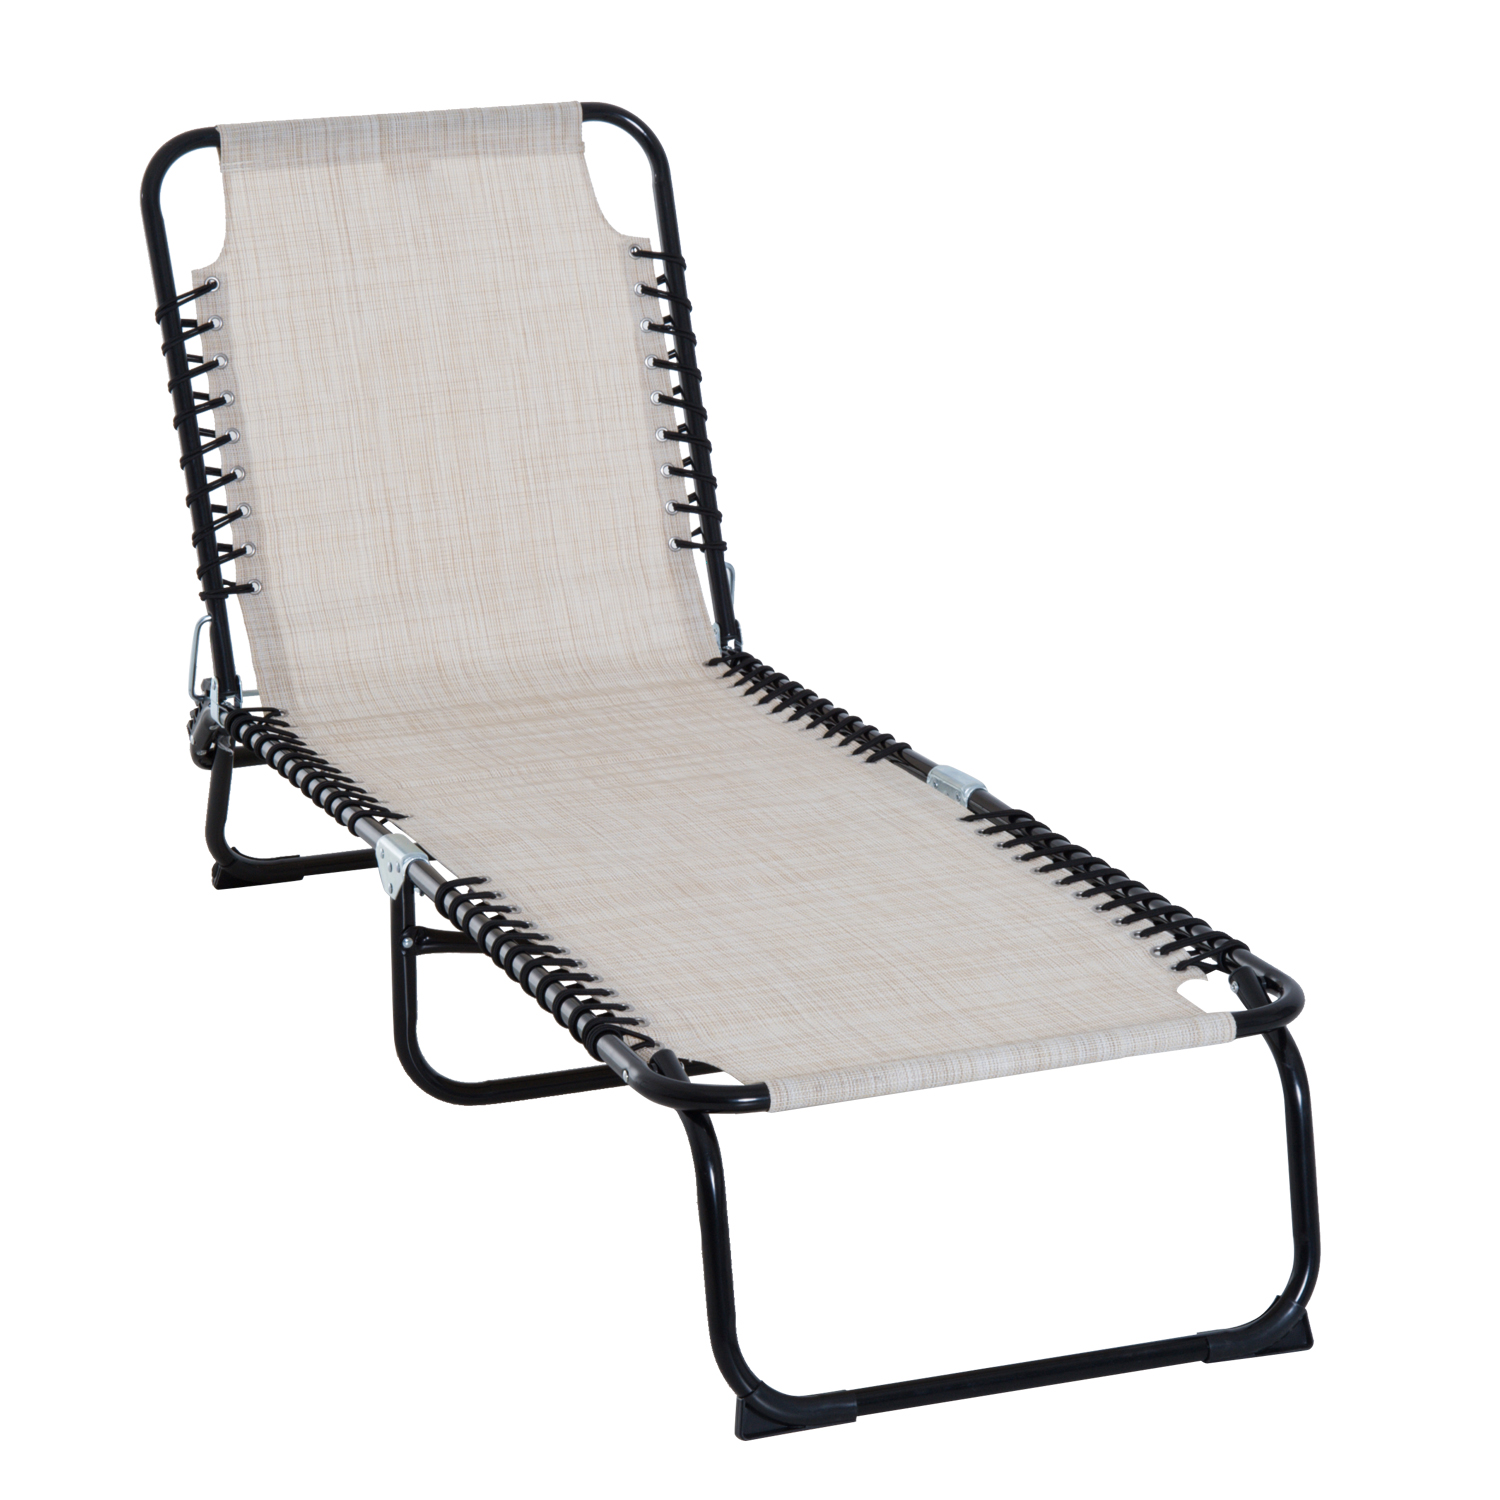 Outsunny Chaise Lounge Pool Chair, Folding, Reclining, Cream White - image 1 of 11